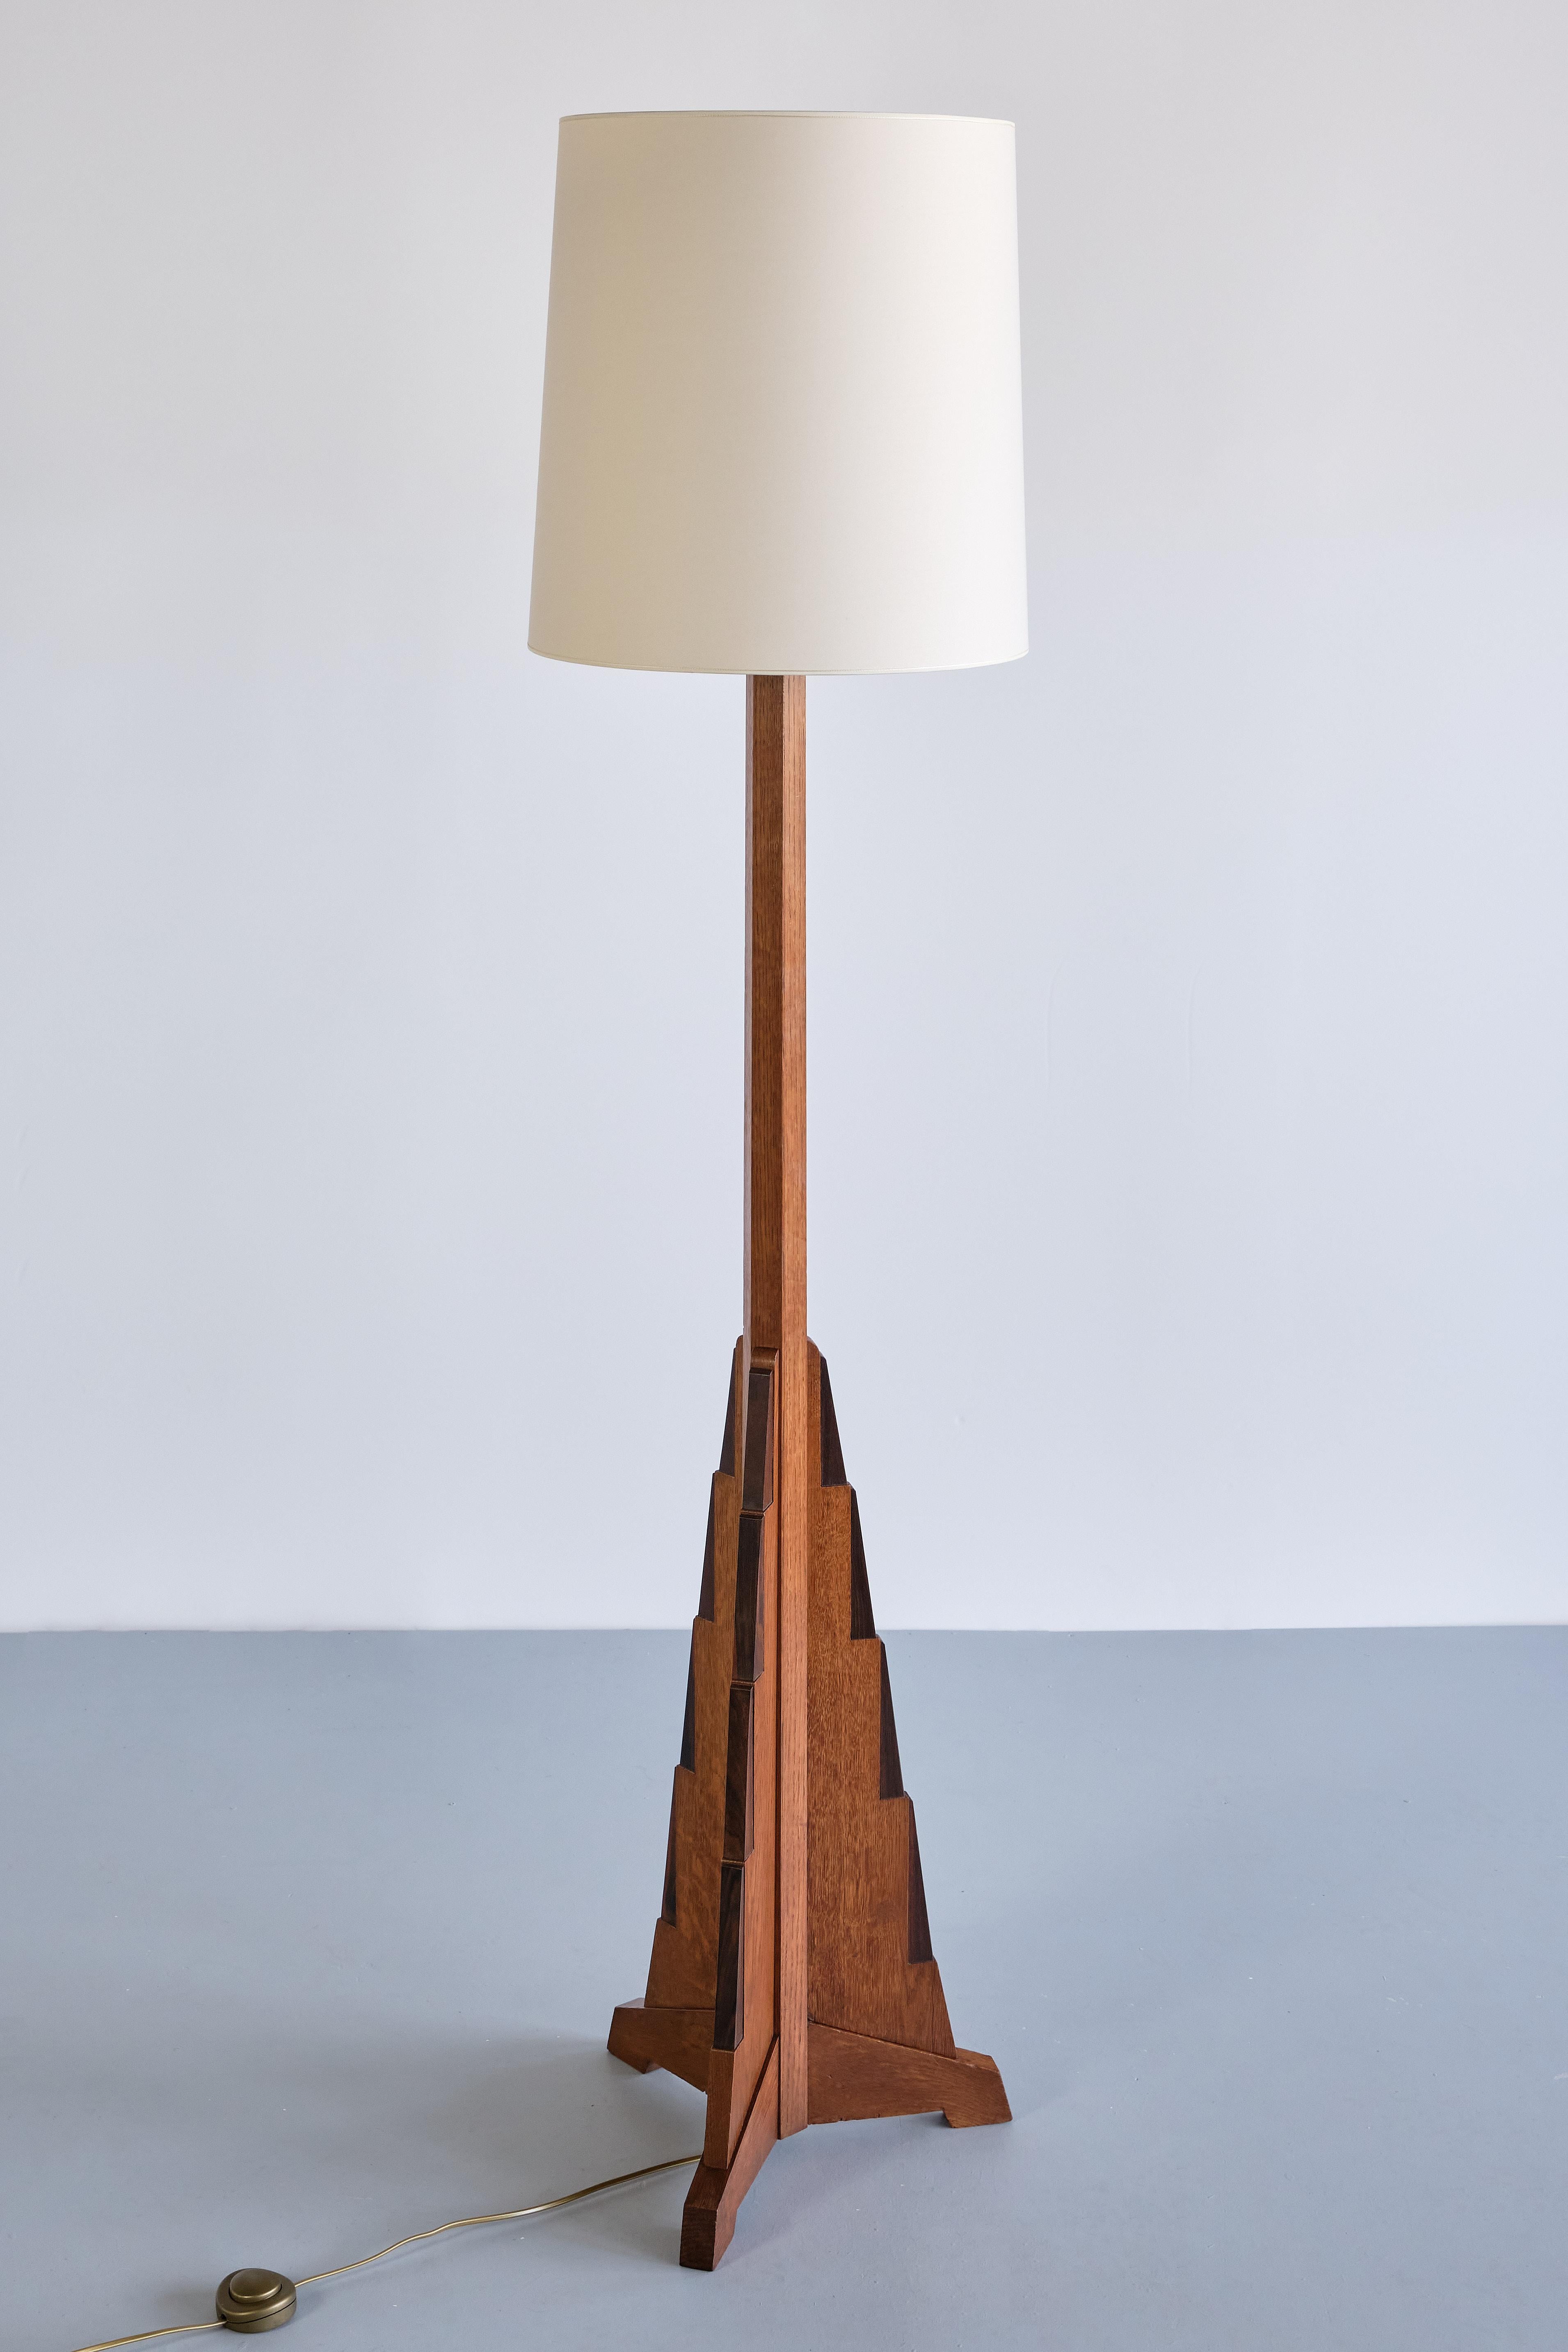 This rare floor lamp was designed by the Dutch designer and architect Cor Alons in the early 1930s.
The design is defined by the geometric, triangular shape of the base which was executed in solid oak wood. The tiered base on three slightly raised